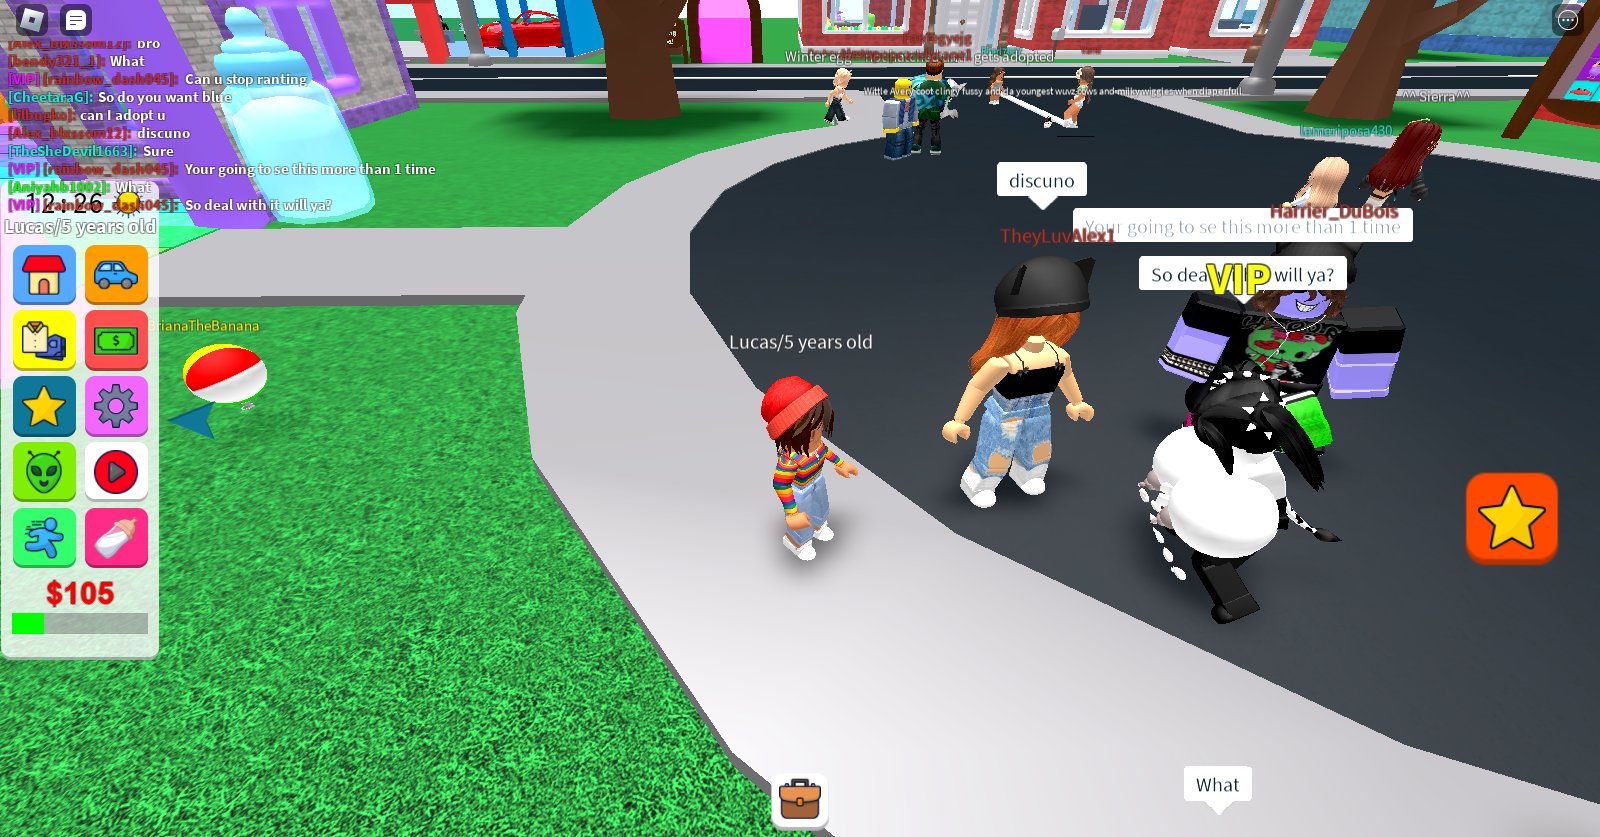 Roblox on X: MeepCity is the first-ever #Roblox game to reach ONE